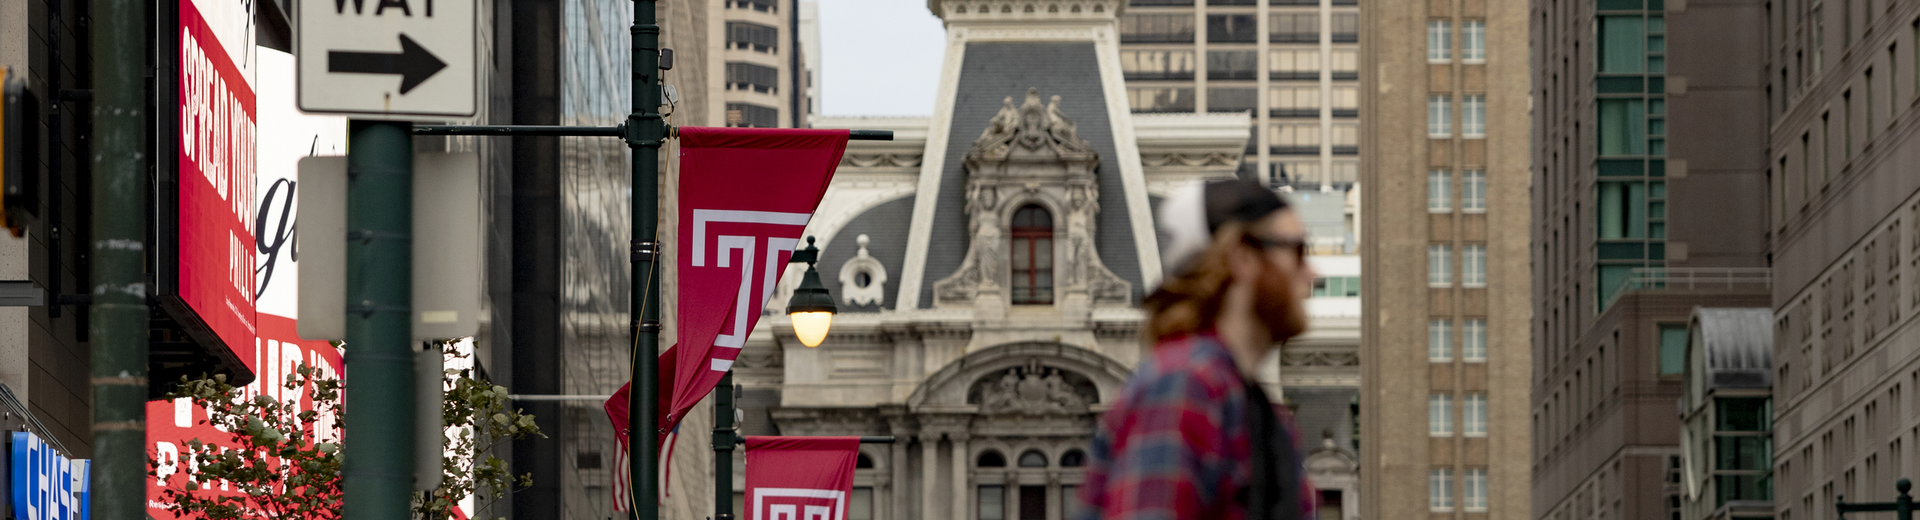 photo of city hall with temple flags and student in foreground